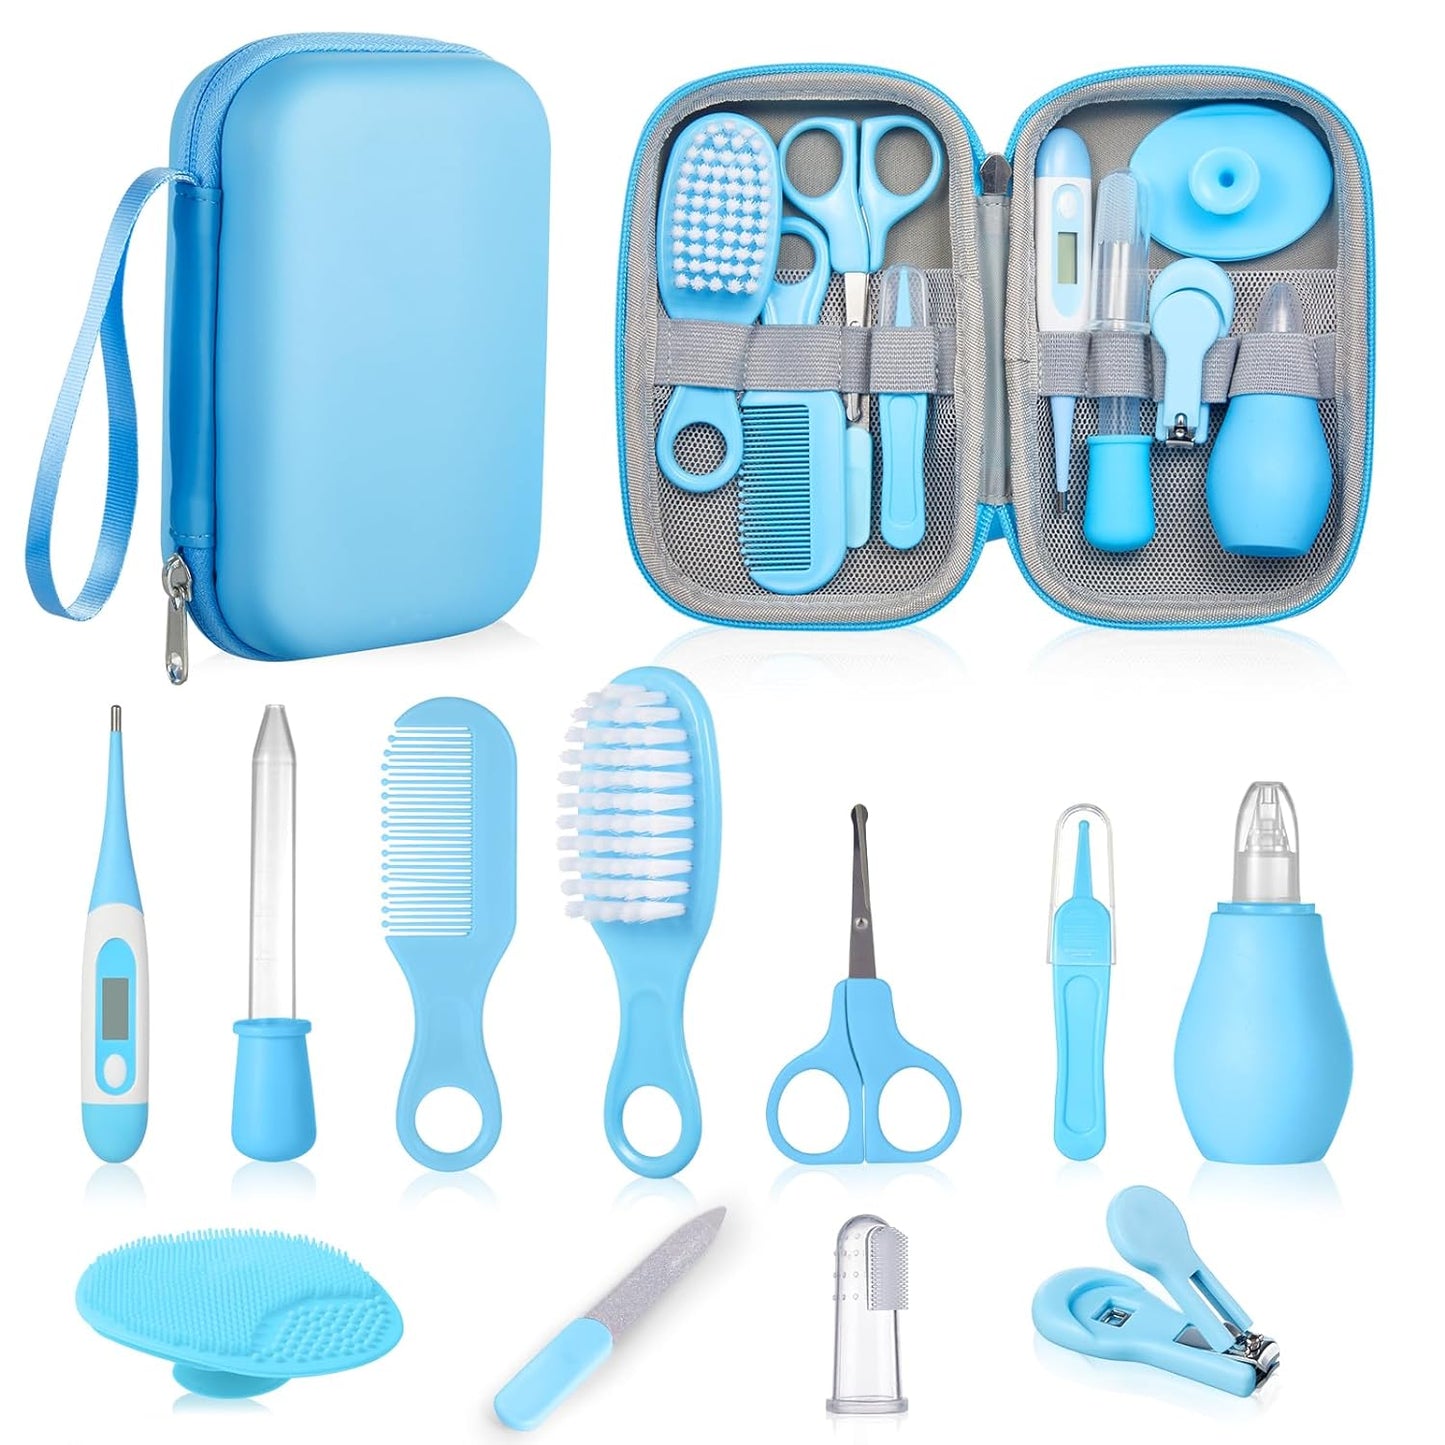 Baby Grooming and Health Kit, Lictin Nursery Care Kit, Newborn Safety Health Care Set with Hair Brush,Comb,Nail Clippers and More for Newborn Infant Toddlers Baby Girls